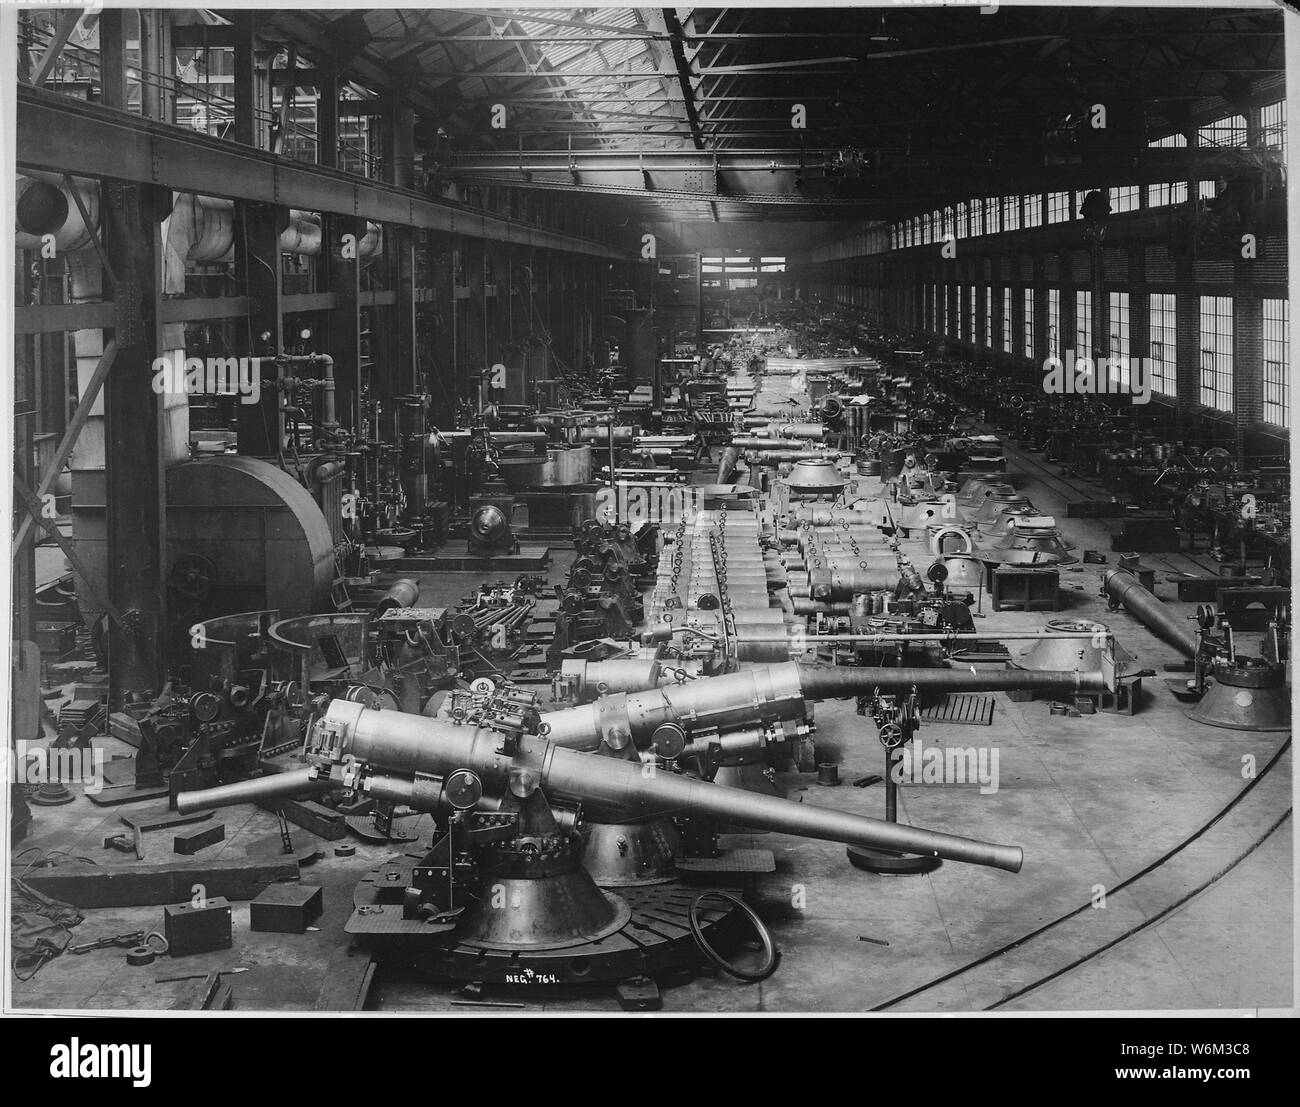 Shop Number 2 annex. 6 inch guns with their mounts in foreground; immediately in the rear, slides or cradles for 10 inch, 12 inch, and 14 inch guns. Bethlehem Steel Company. Bethlehem Steel Company., ca. 1918; English: The 6-inch guns in the foreground are US Army M1900 guns on the M1900 pedestal mount with shields removed; they are possibly about to be mounted on field carriages for service in France. Alternatively, the photo may date from circa 1905, when this type of weapon was being manufactured. General notes:  Use War and Conflict Number 555 when ordering a reproduction or requesting inf Stock Photo